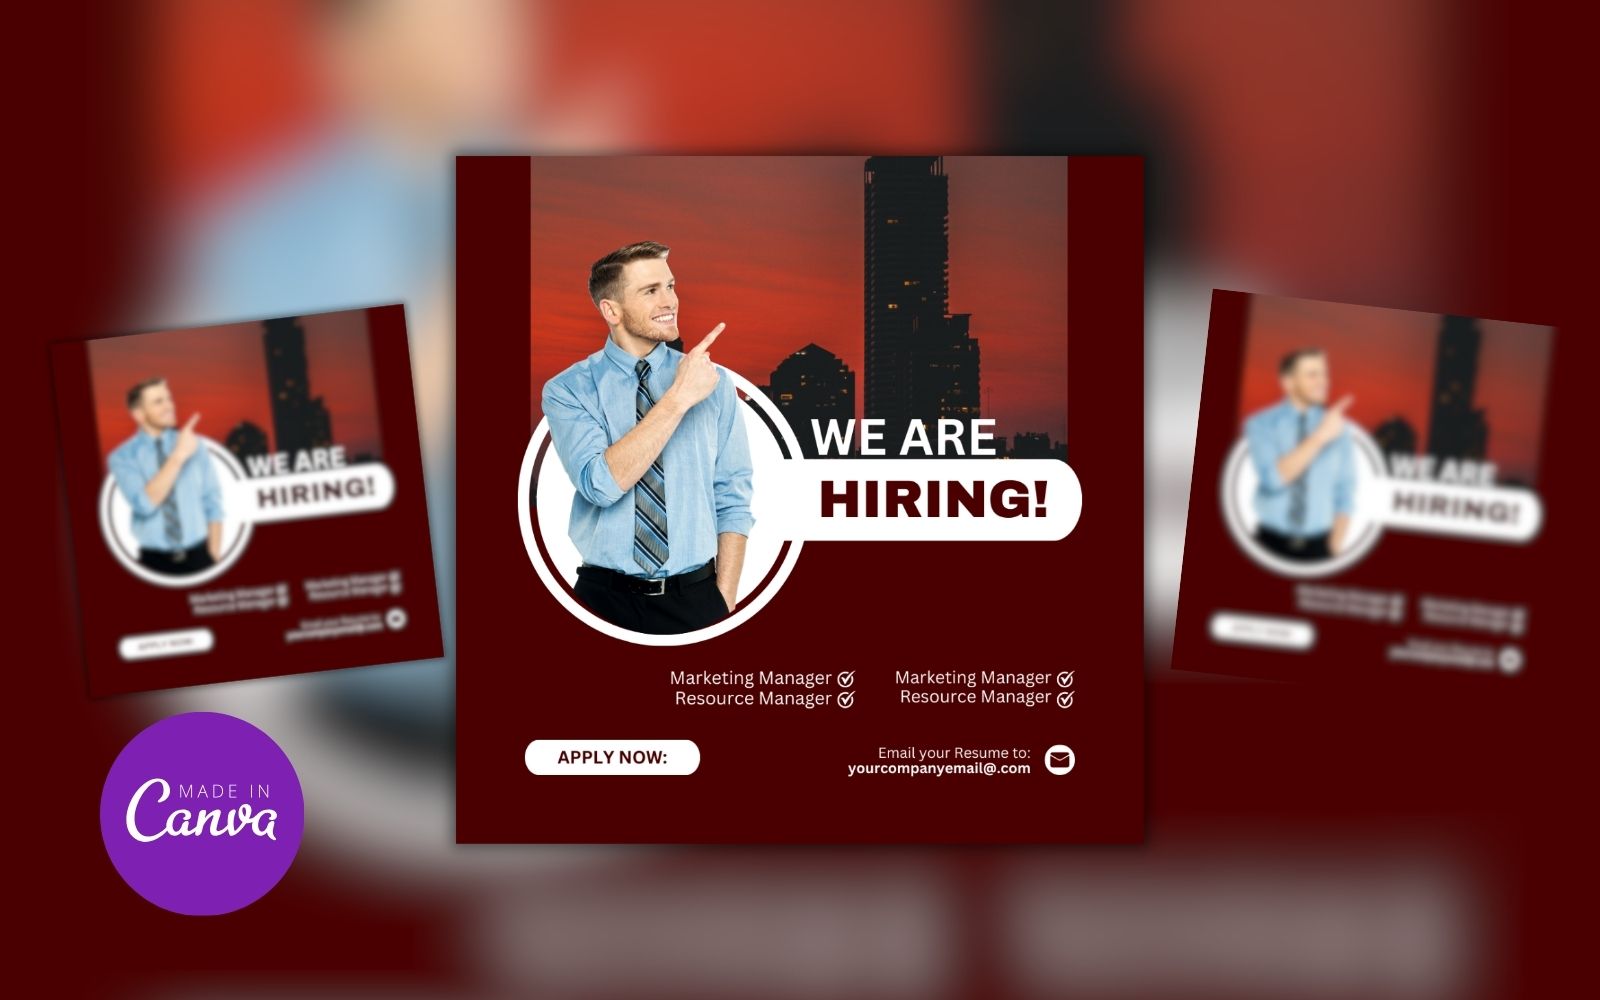 We Are Hiring Design Template